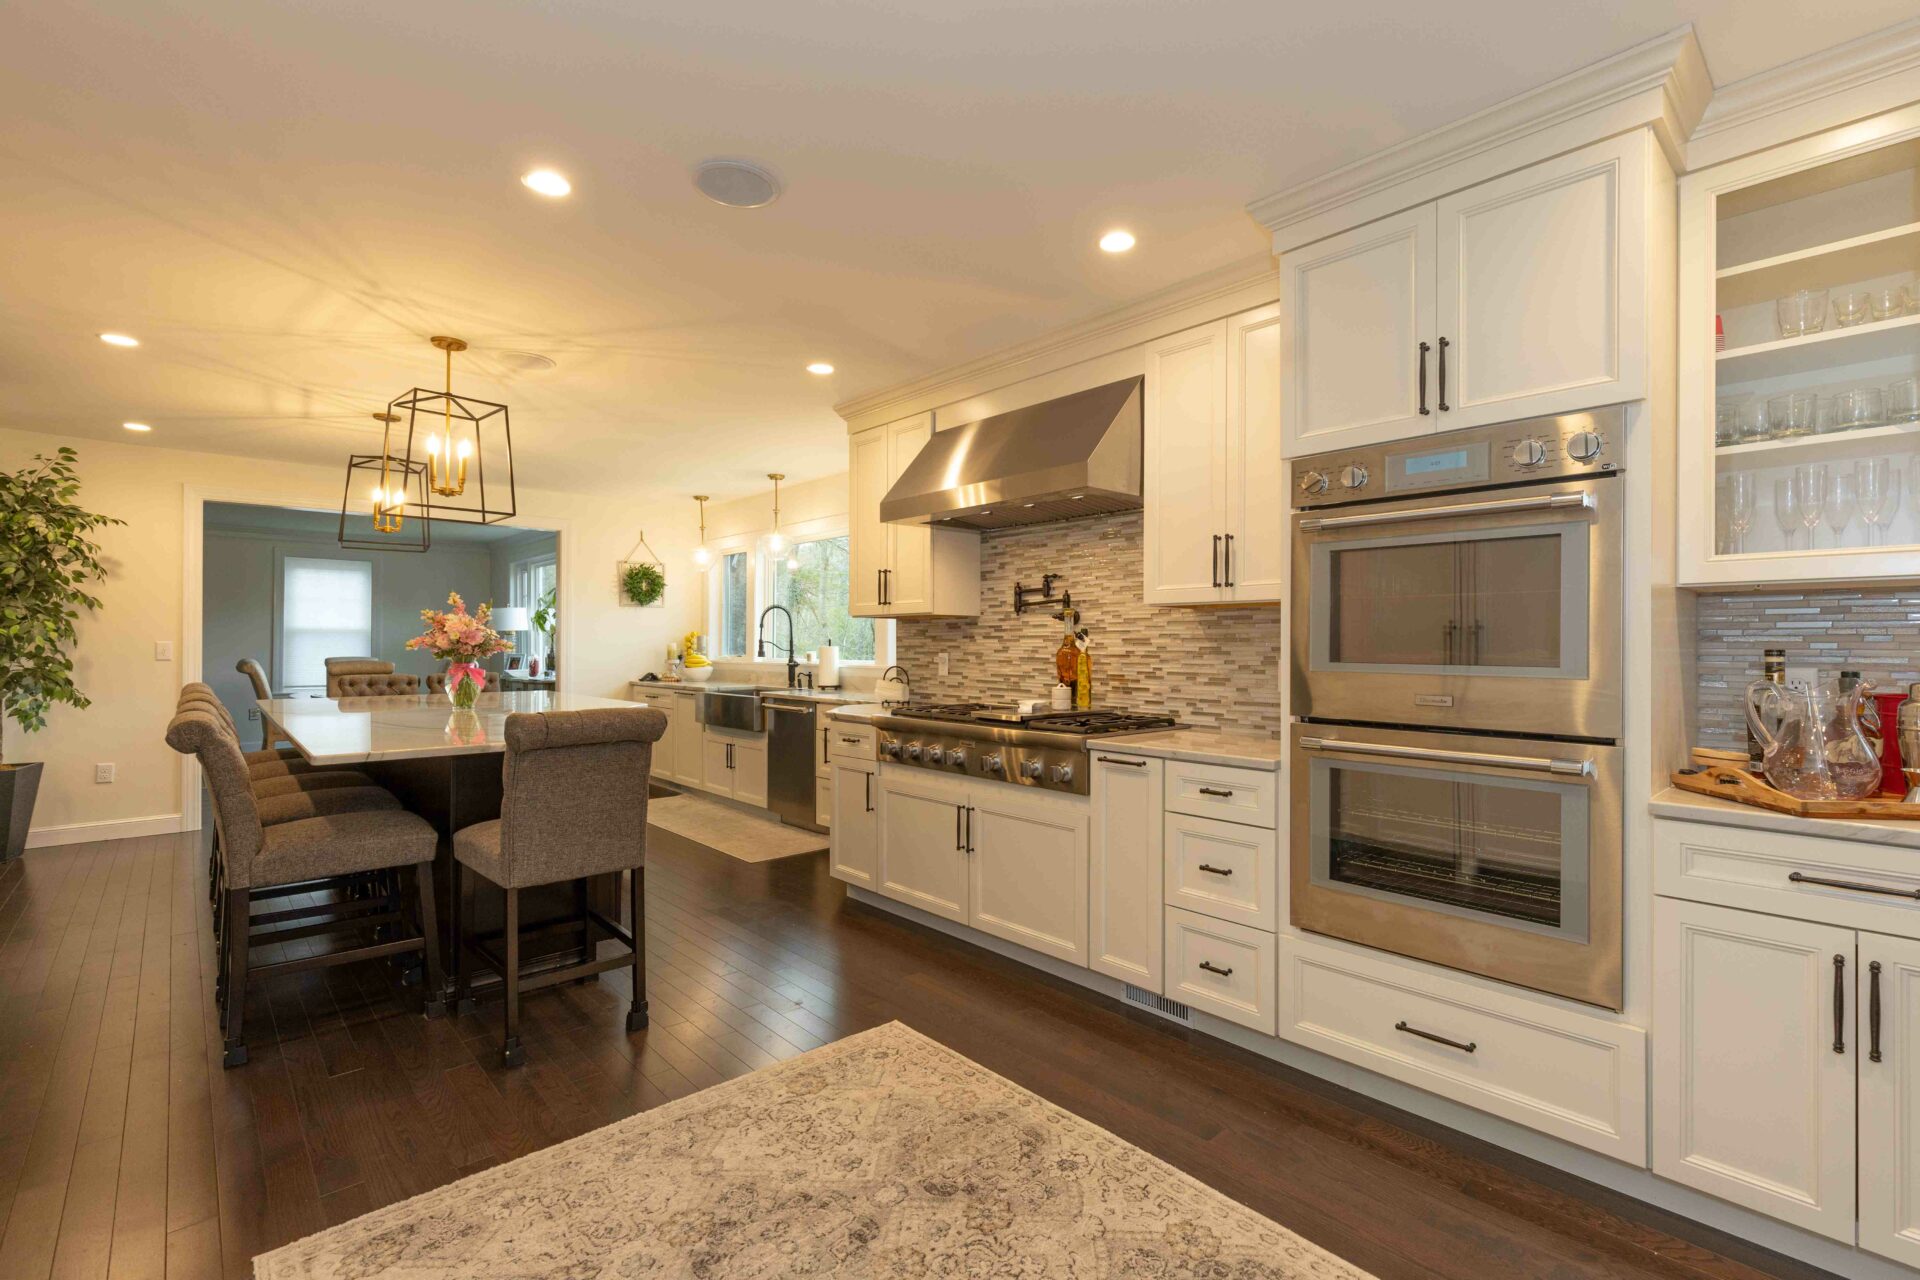 Professional Insights on Hiring a Kitchen Remodeling Contractor